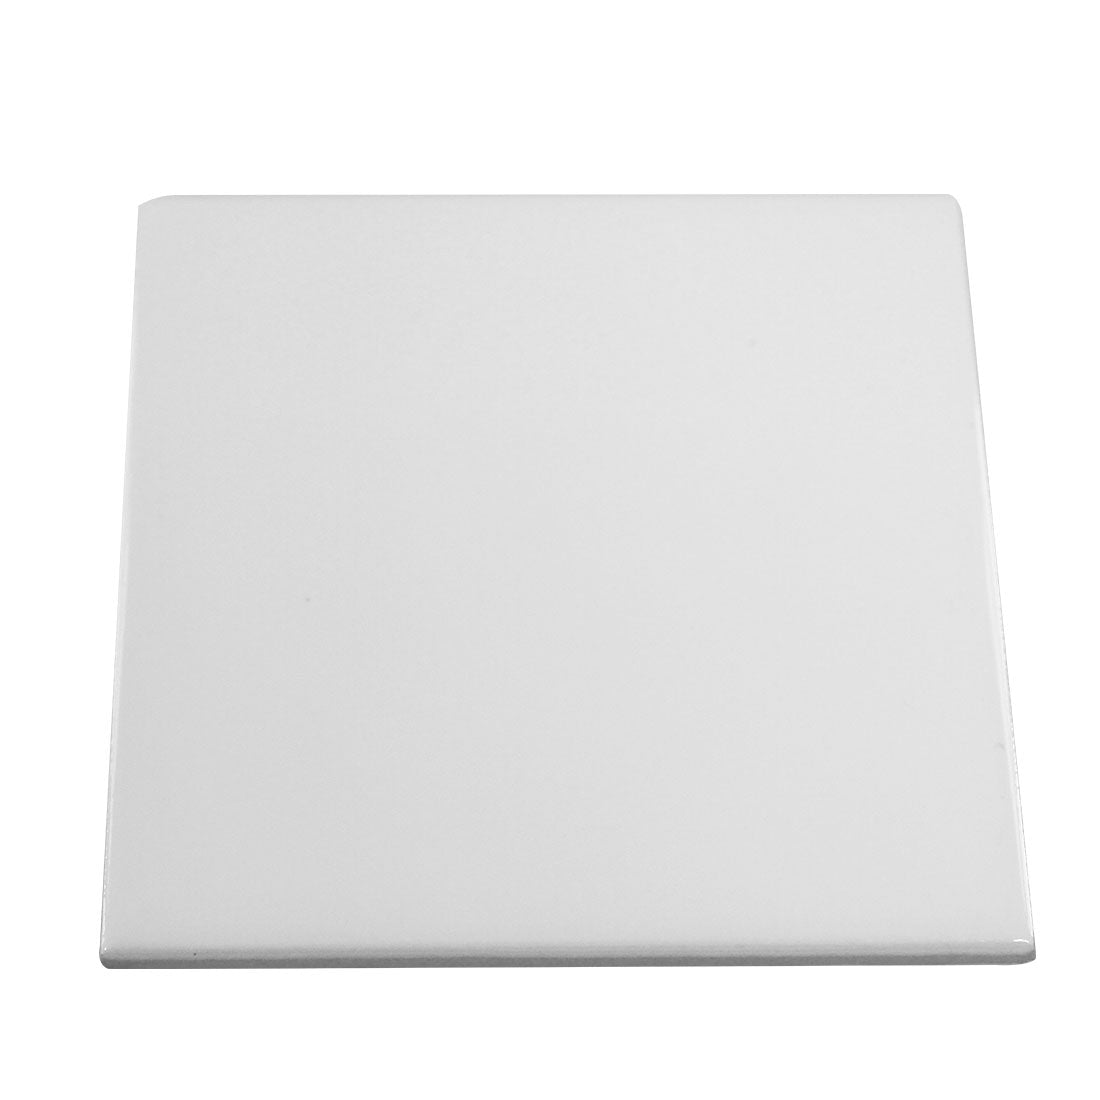 Pearl Coating™ Sublimation Tiles - Pack of 48 or 60 - Joto Imaging Supplies Canada